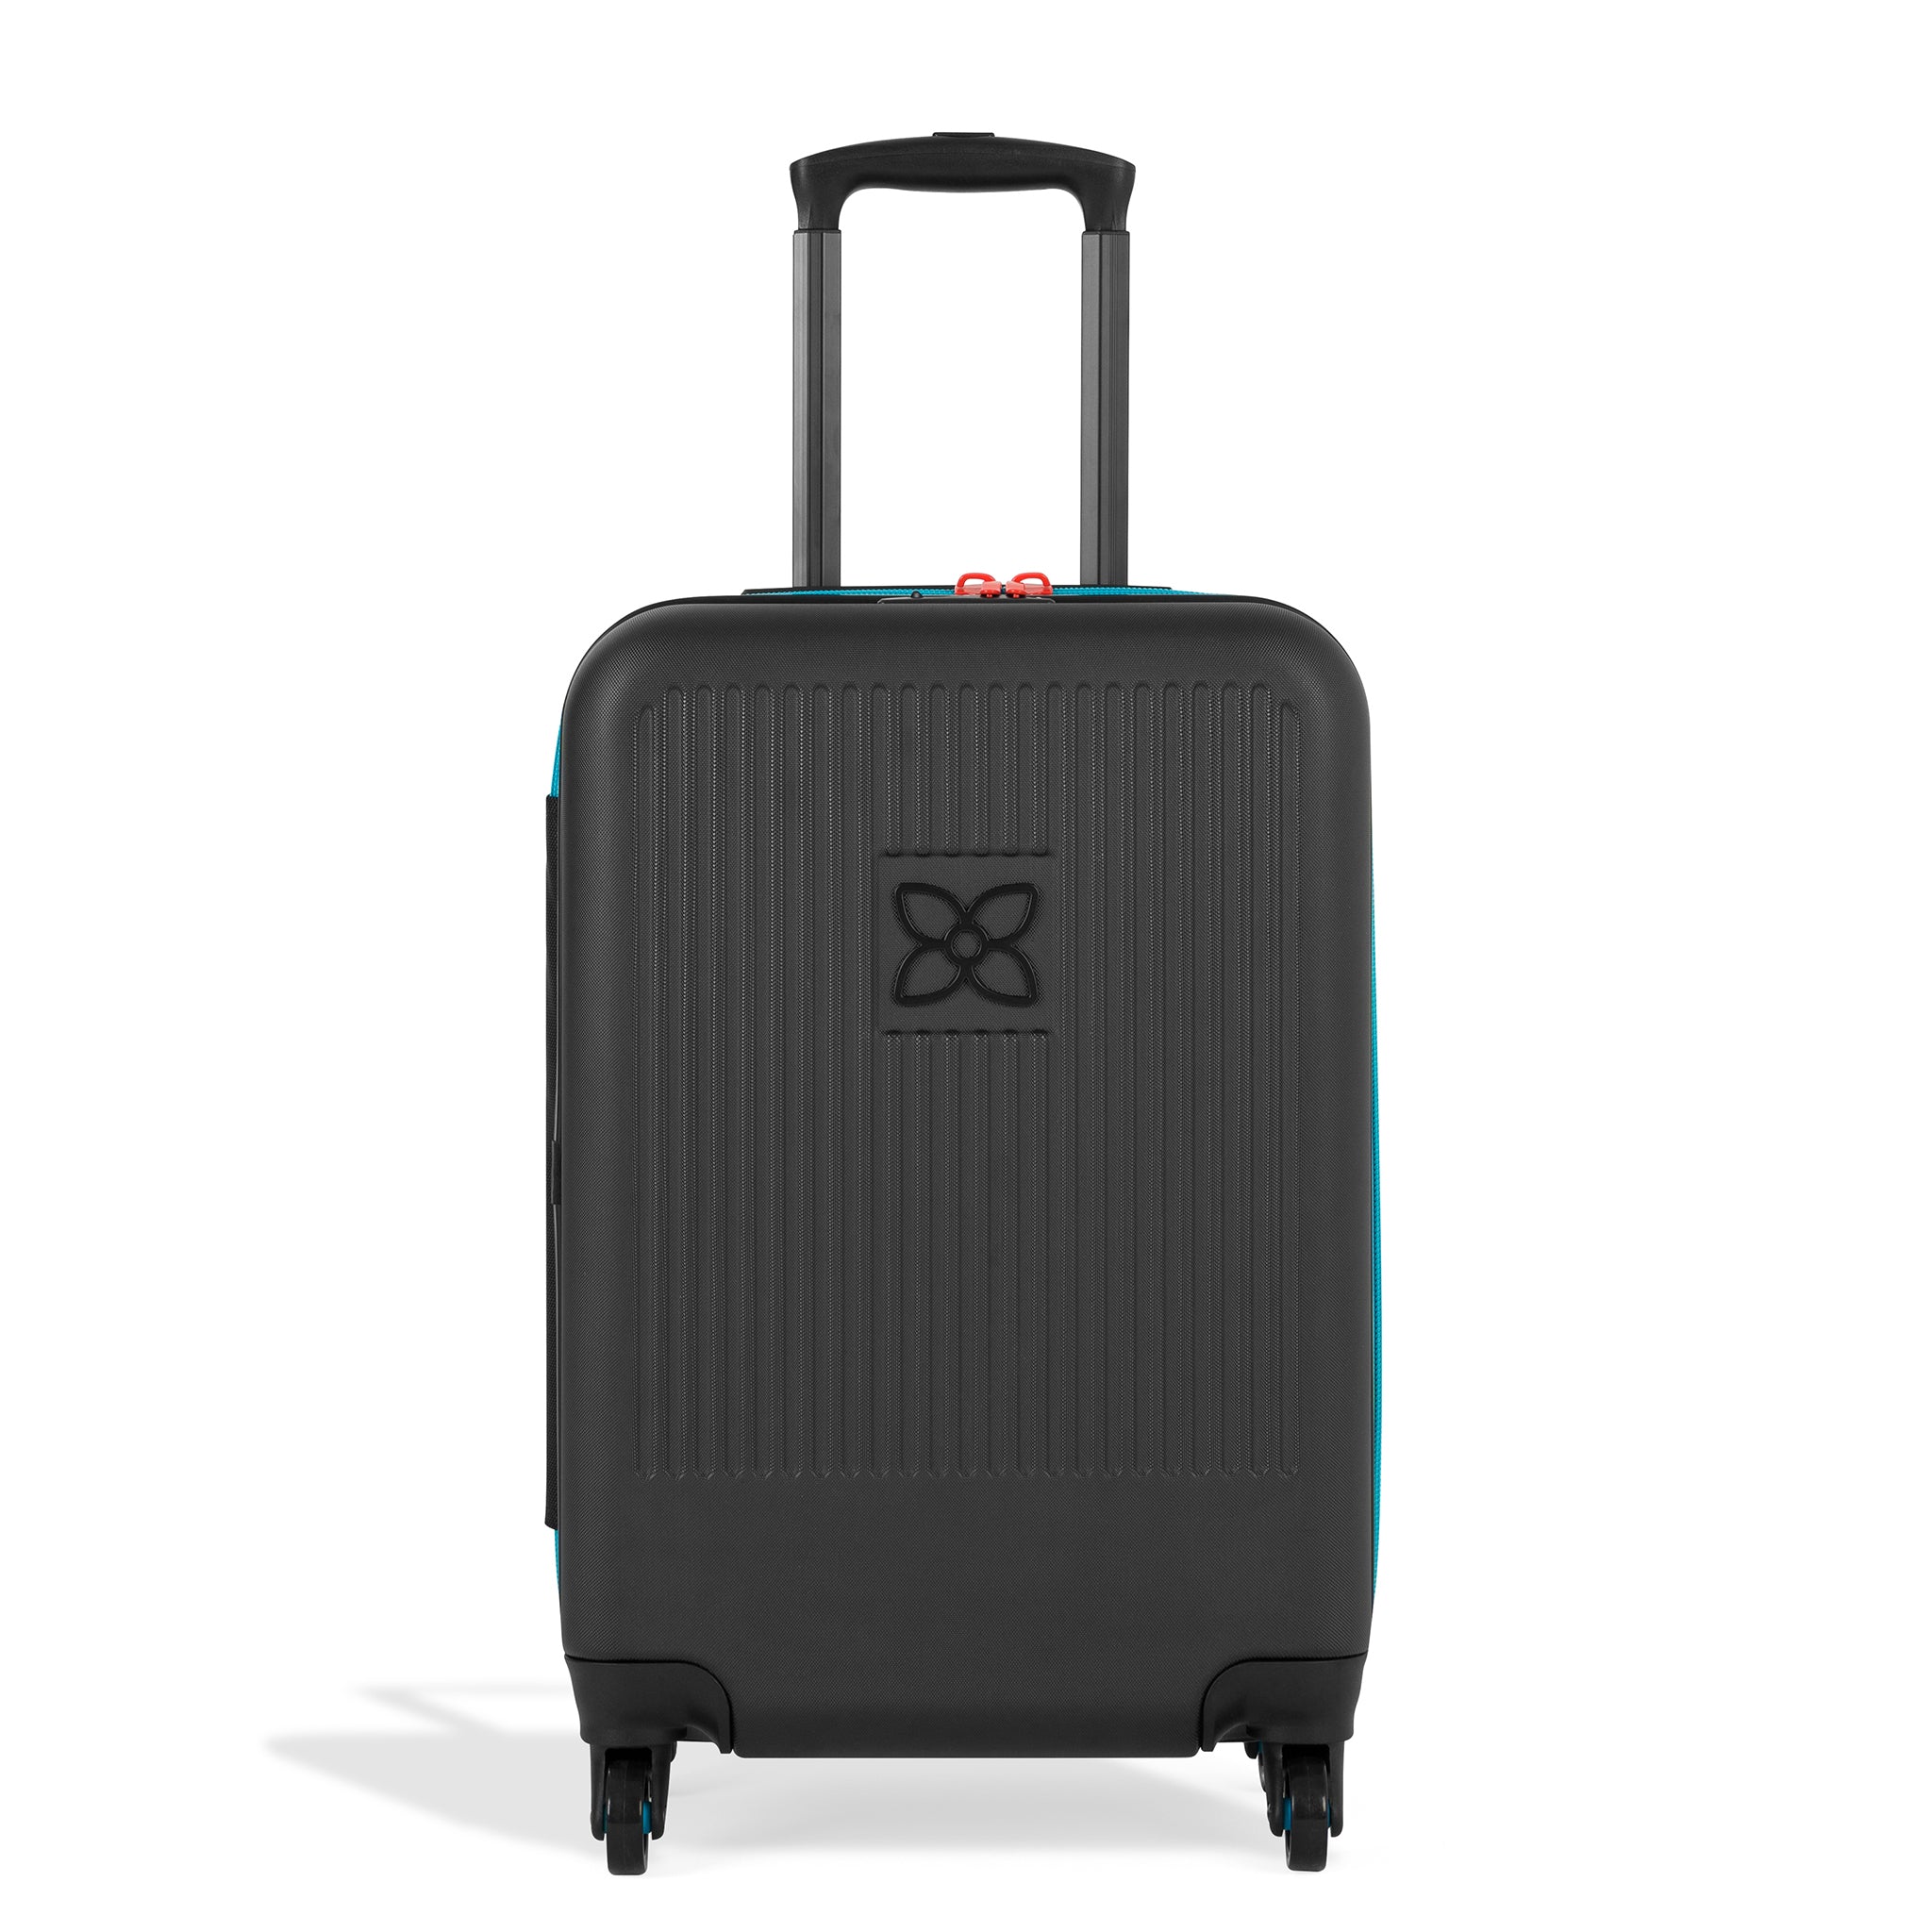 Sherpani hard-shell luggage the Meridian. Part of Sherpani Travel Carry-on Bundle in Cool Chromatic.